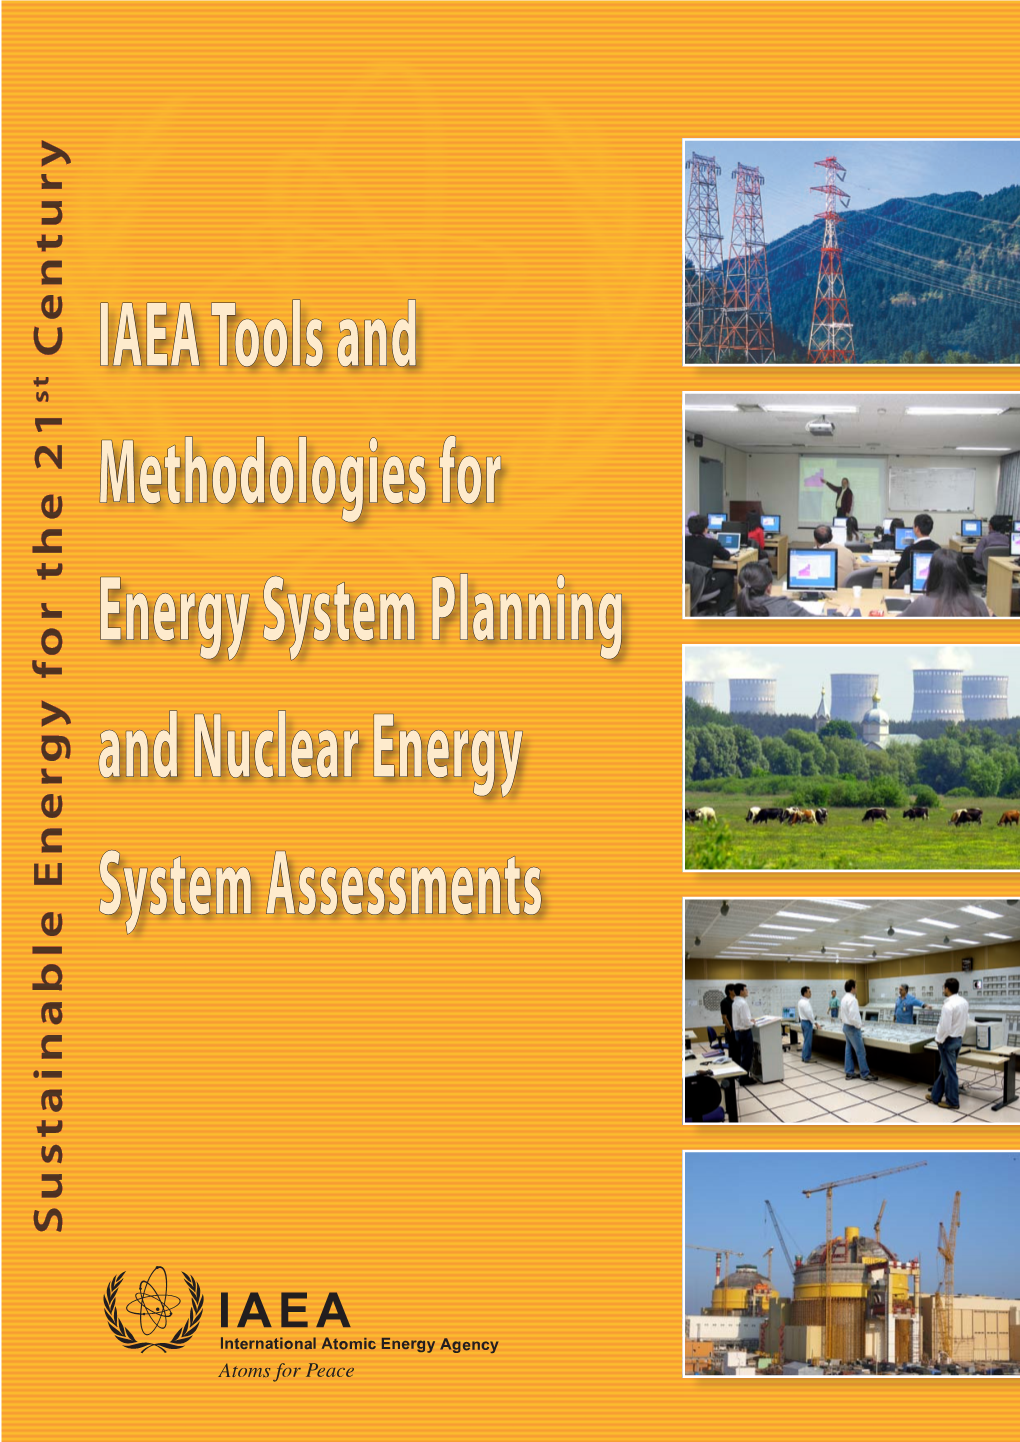 IAEA Tools and Methodologies for Energy System Planning and Nuclear Energy System Assessments